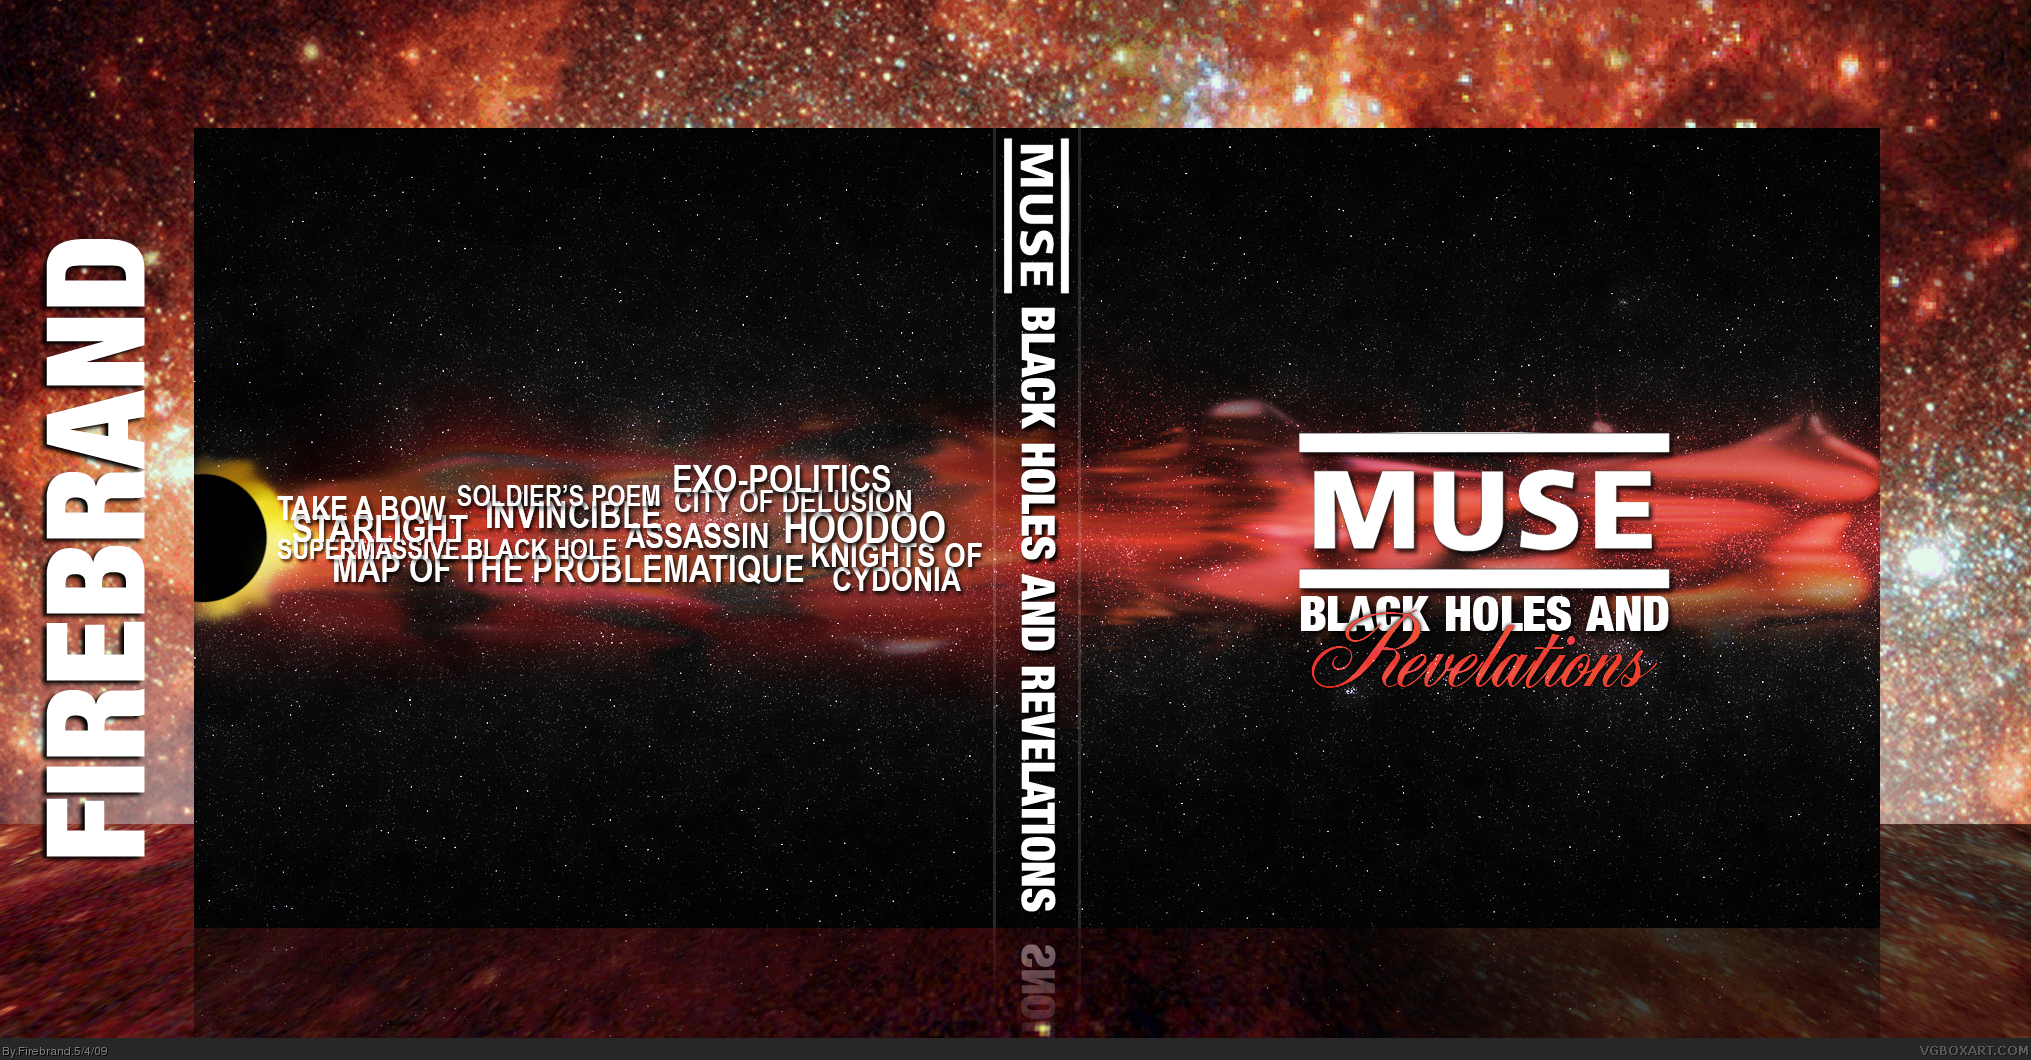 Muse: Black Holes and Revelations box cover